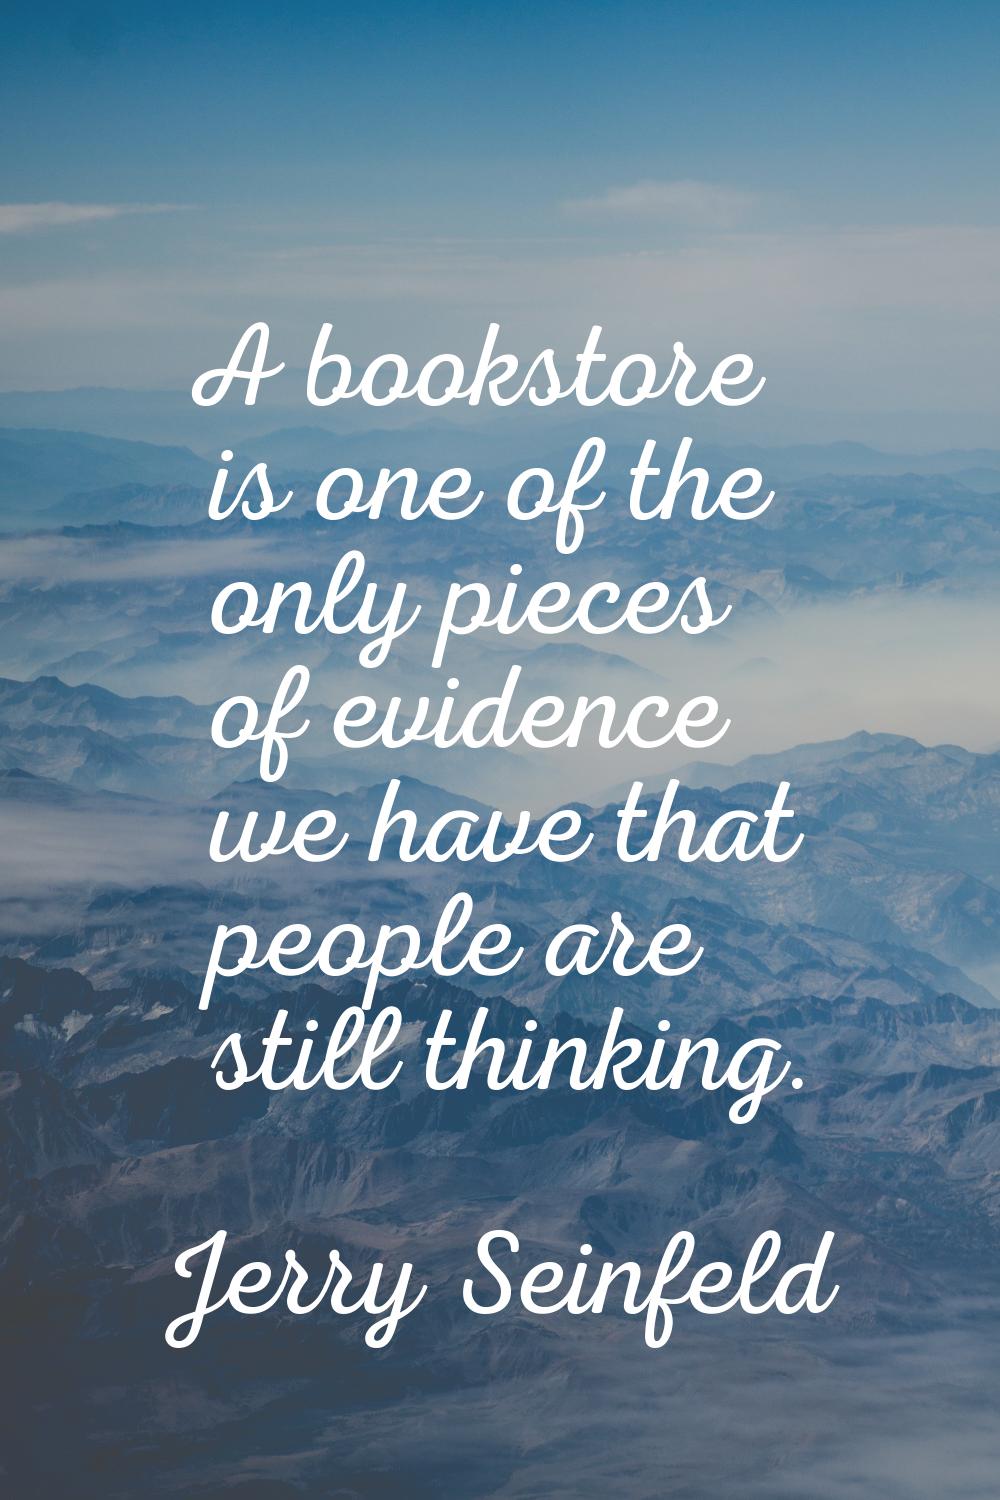 A bookstore is one of the only pieces of evidence we have that people are still thinking.